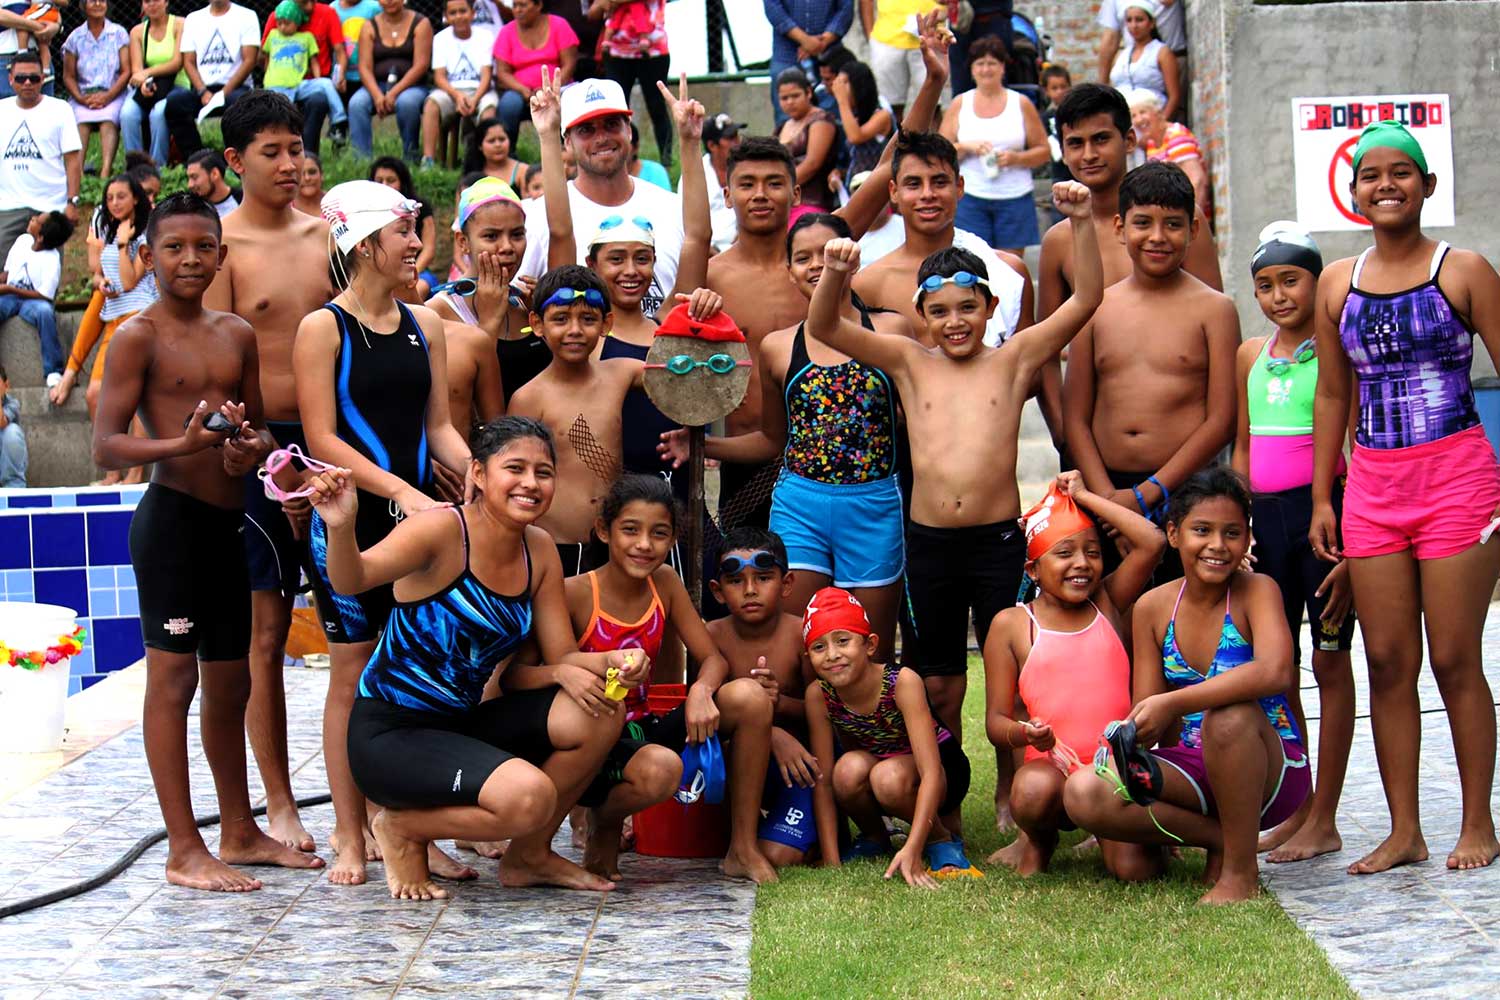 Former UVA Swimmers with Nicaraguan children in bathing suits